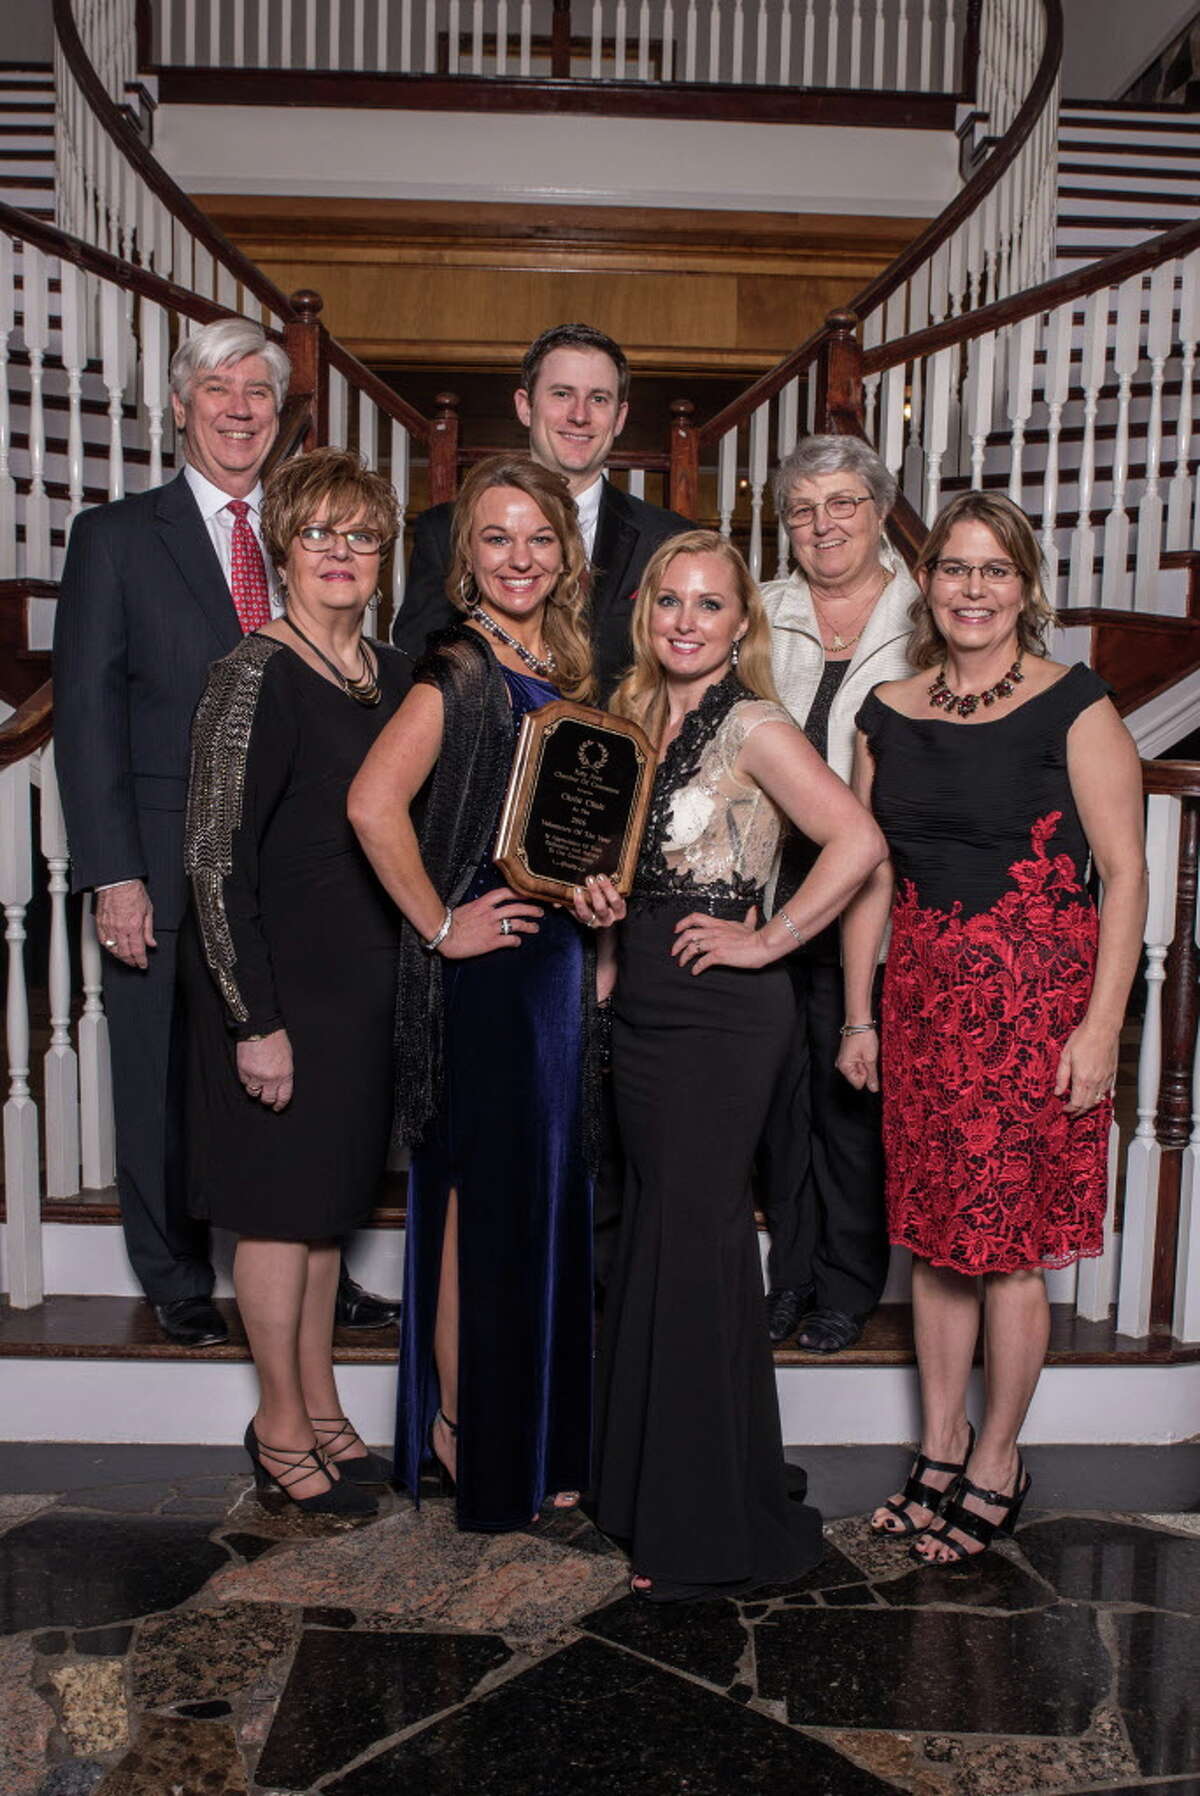 Christ Clinic was recognized by the Katy Area Chamber of Commerce as the Volunteers of the Year at the chamber's gala in February. From left, back row, are: Ken Janda, Allan Kirk and Rev. Gil Keyworth; front row: Sherry Nelson, Kara Hill, Lara Hamilton and Dr. Cindy Anthis.